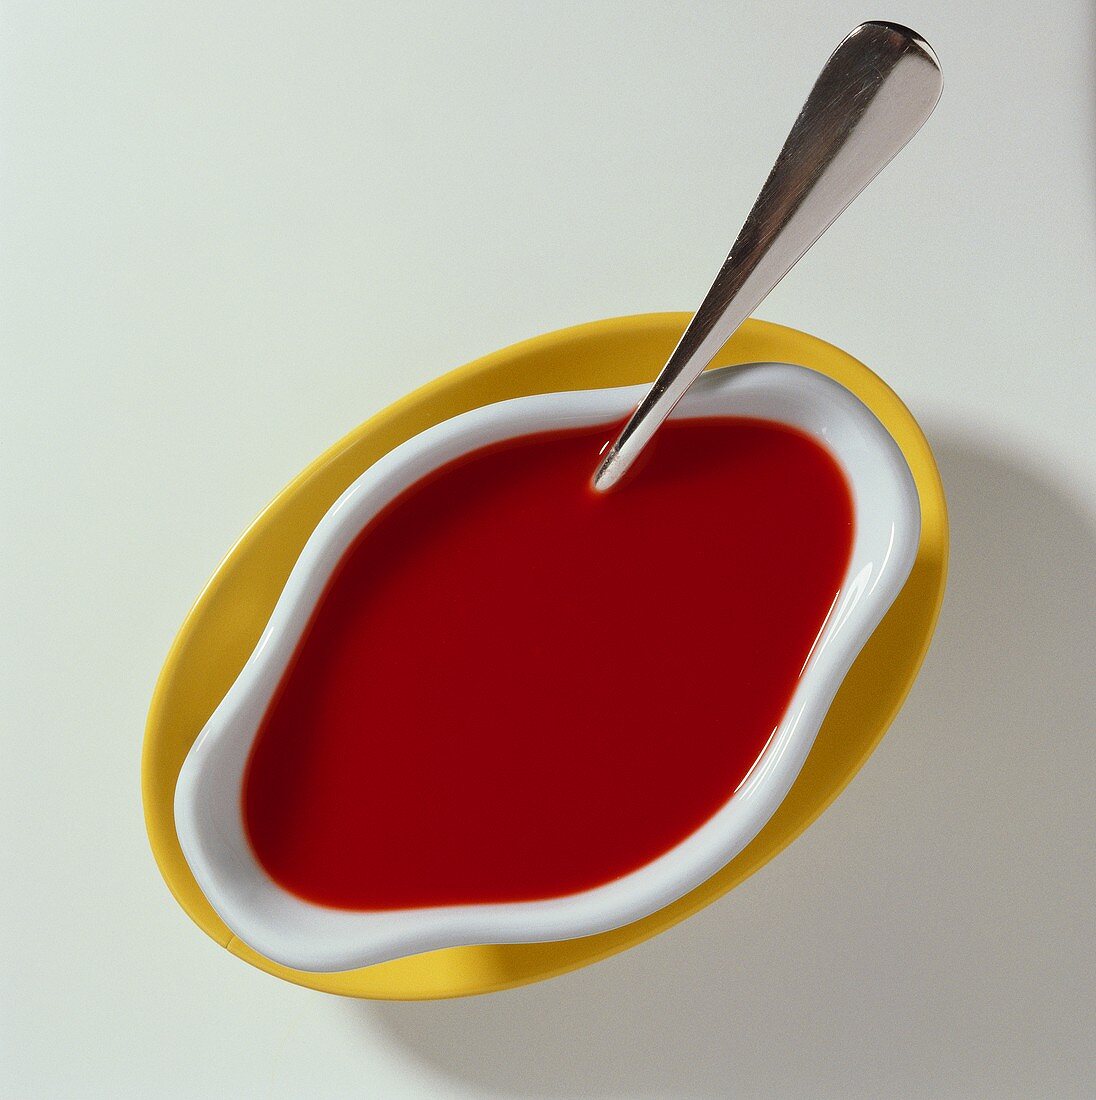 Tomato sauce in sauce boat with spoon